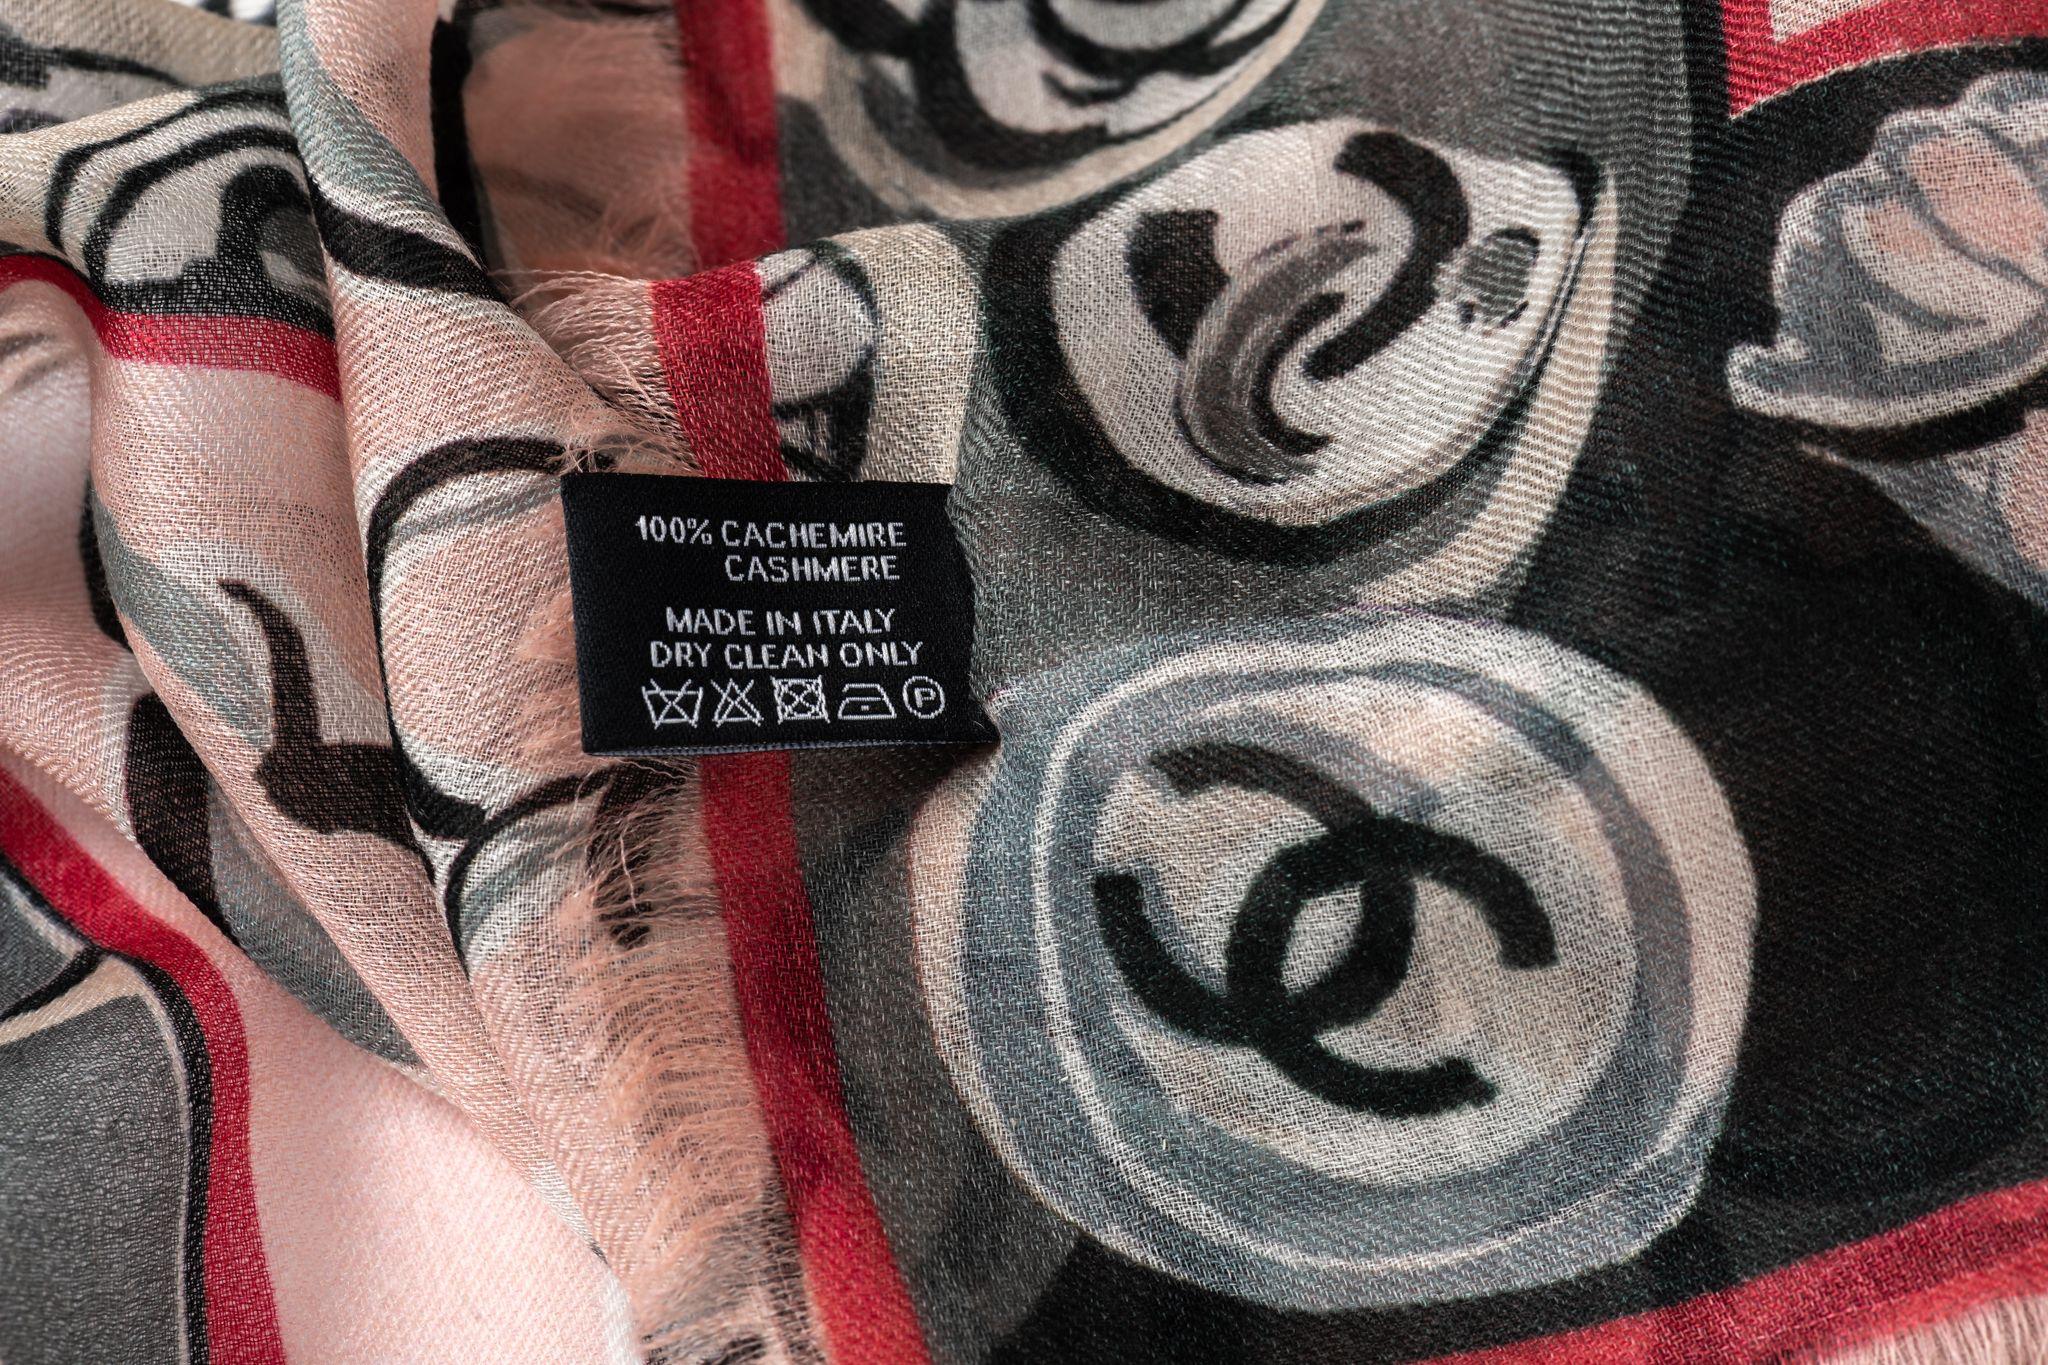 Chanel new camellia cashmere shawl in pink and black . Original care tag.